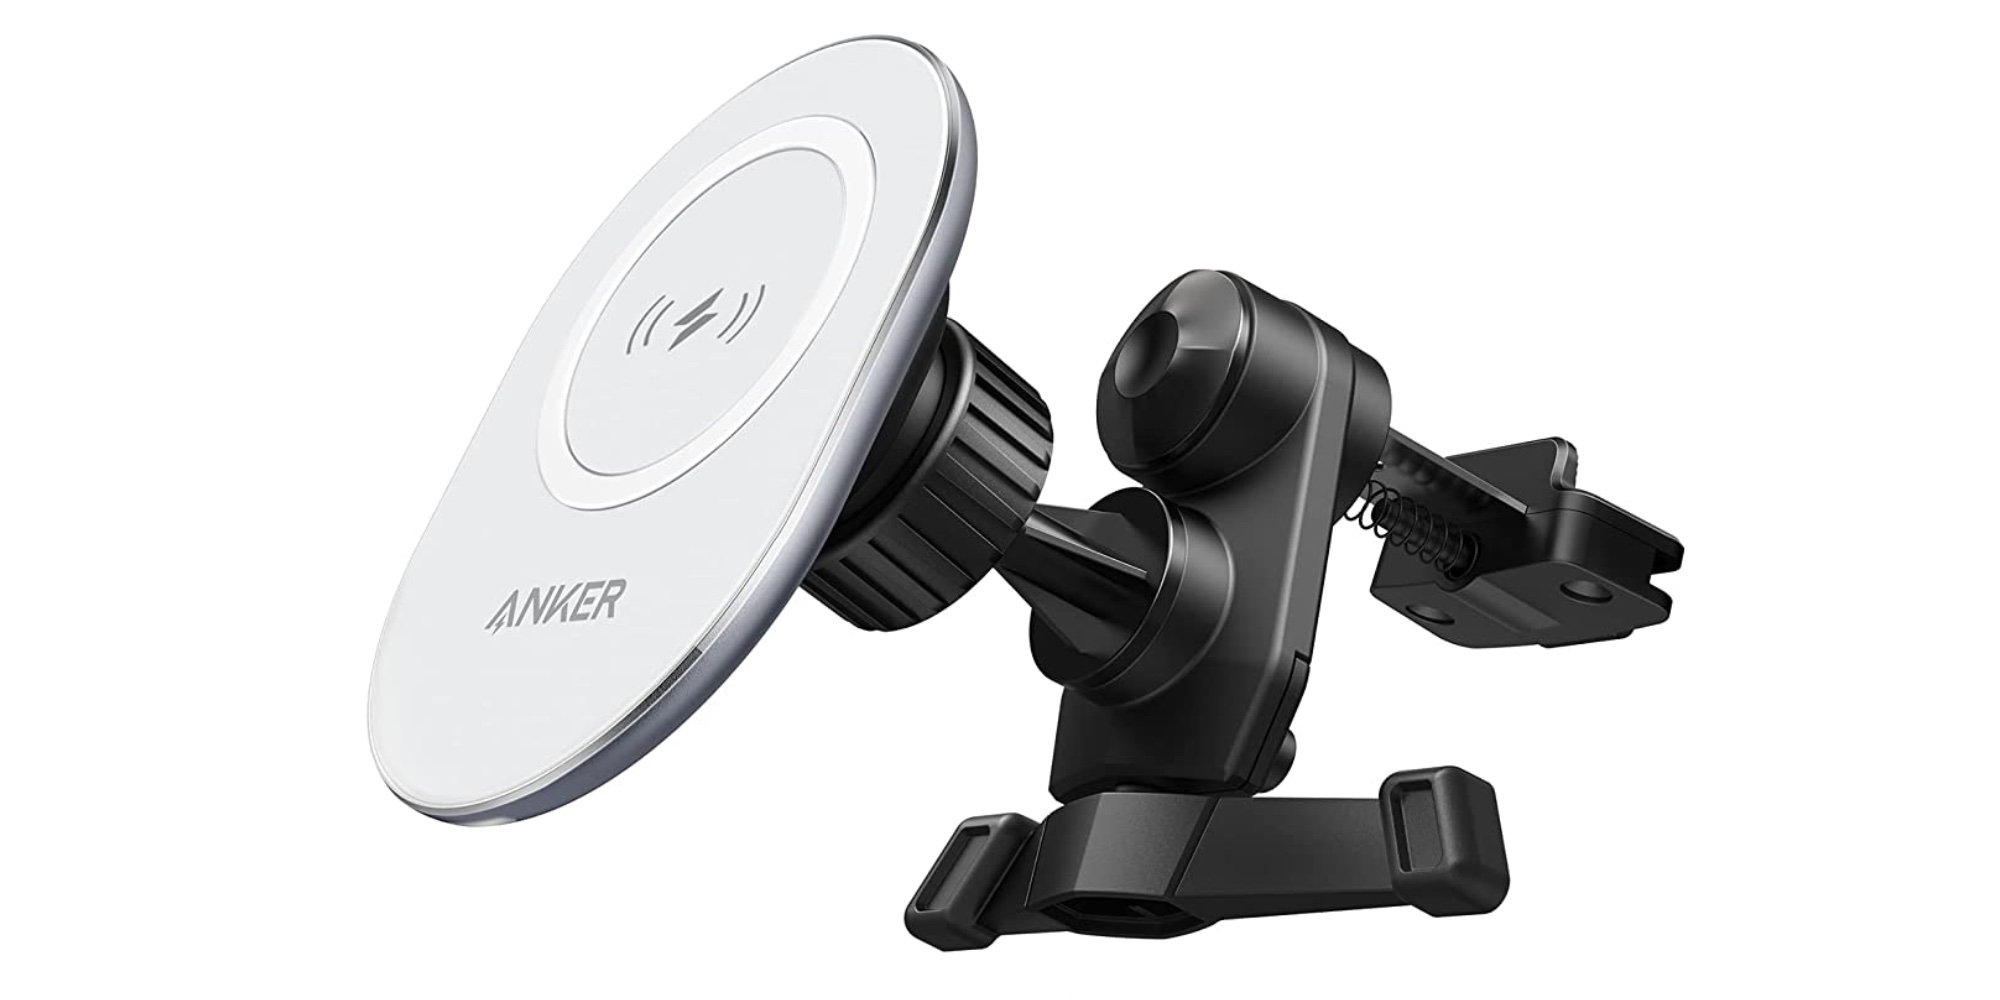 Anker MagSafe Car Mount debuts as latest PowerWave release - 9to5Toys